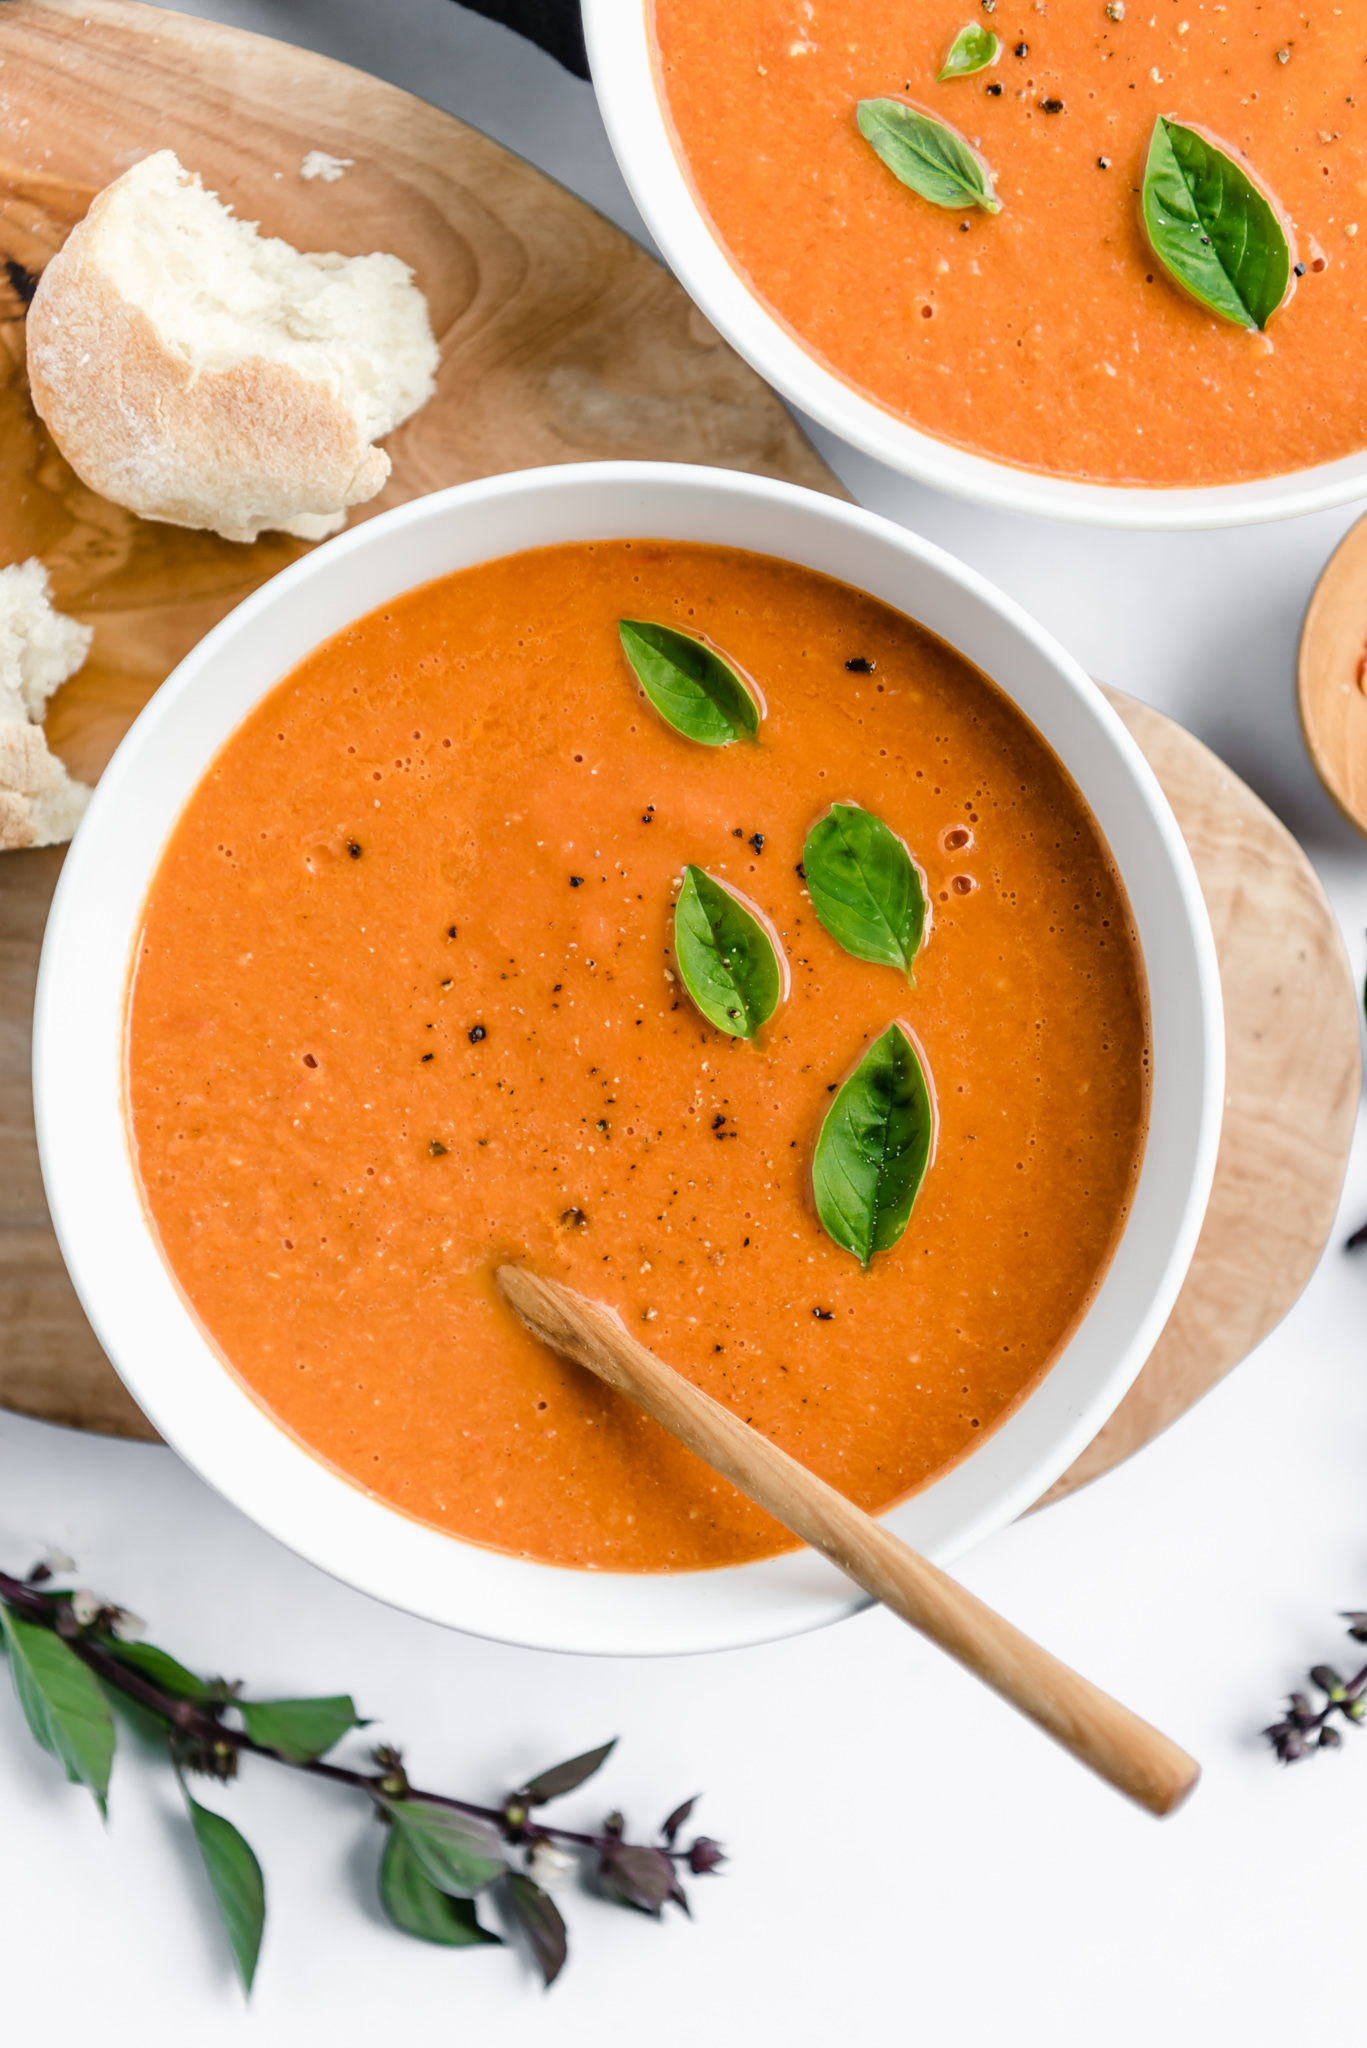 tomato soup with basil garnish and crusty bread